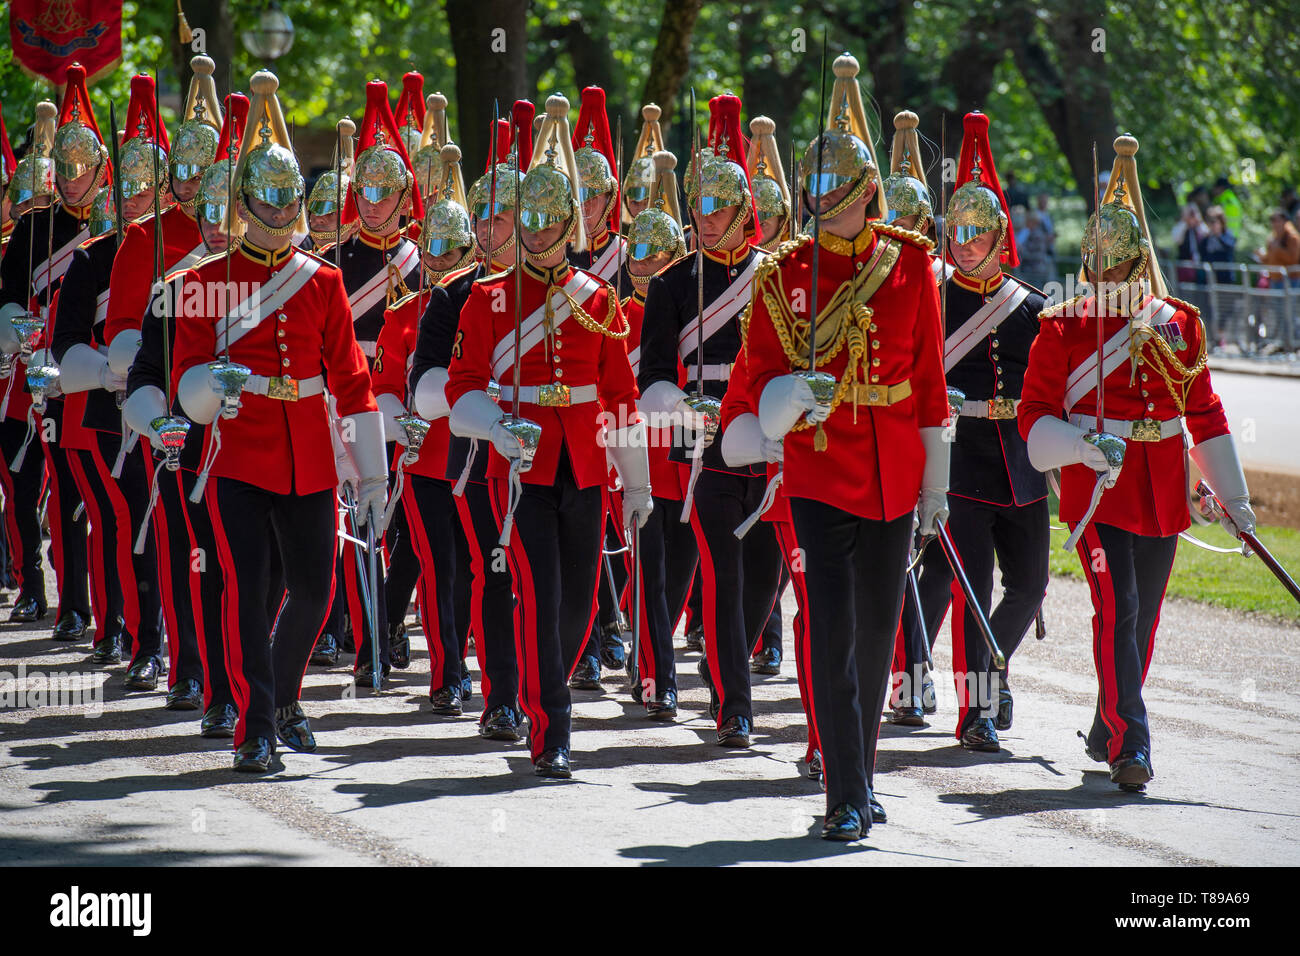 Hyde Park London, UK. 12th May 2019. The Combined Cavalry Old Comrades Association 95th annual parade and service. The parade is commanded by Lieutenant-General Sir Simon Mayall, KCB, CB, Colonel of 1st The Queens Dragoon Guards who are the sponsor regiment of this year’s event. Credit: Malcolm Park/Alamy Live News. Stock Photo